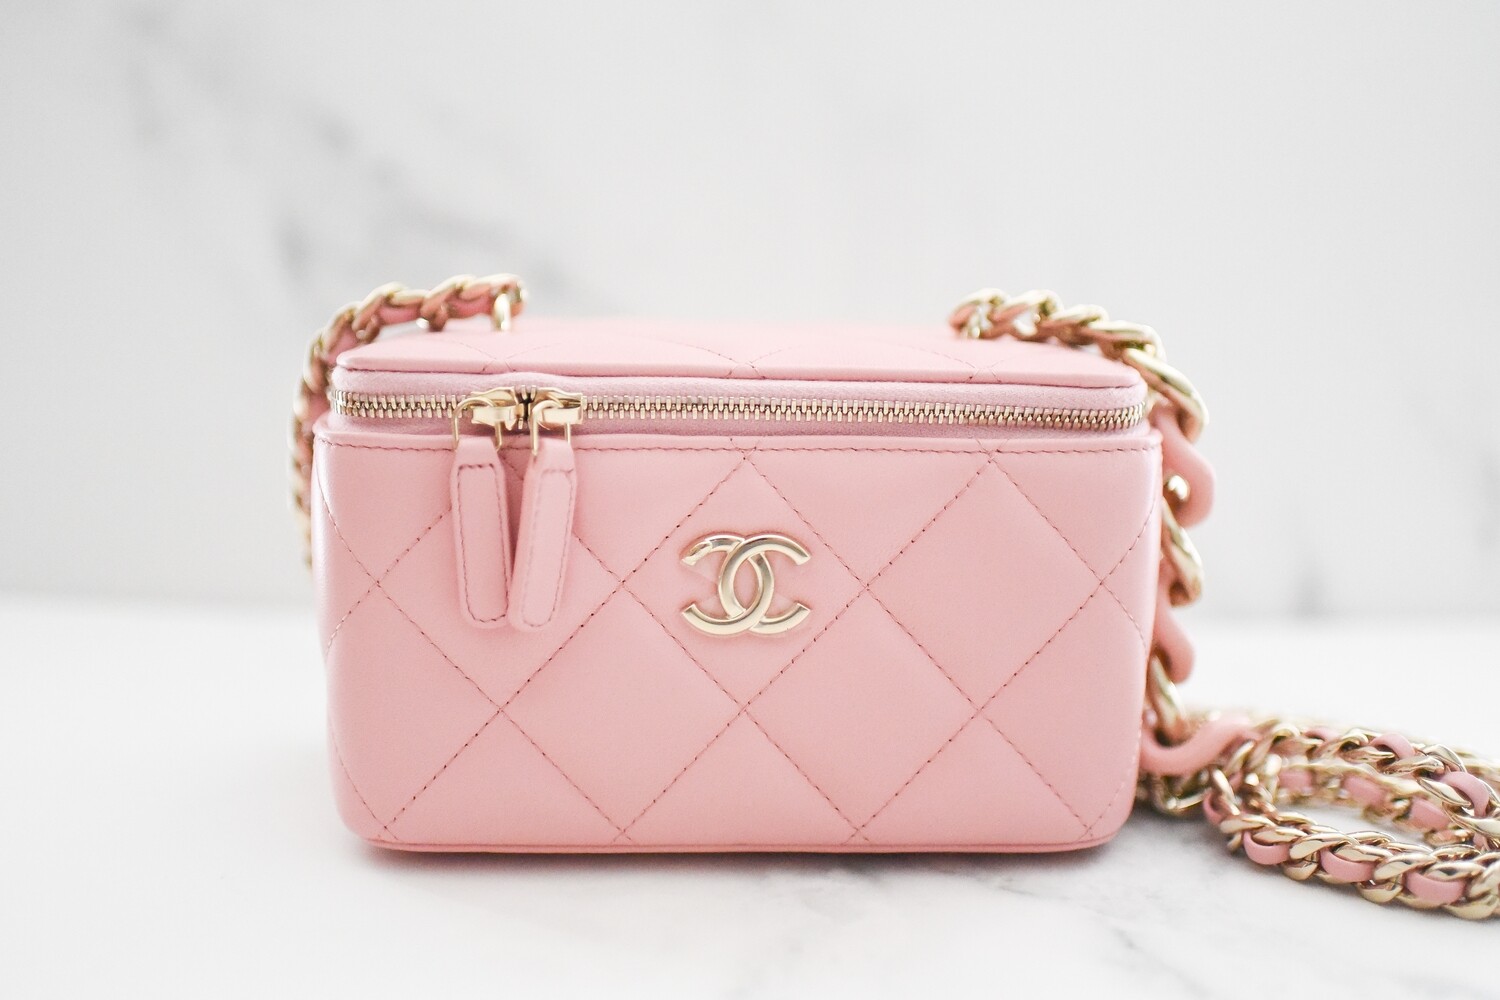 Chanel Vanity Rectangle with Top Handle, 21A Dark Pink Lambskin Leather,  Gold Hardware, New in Box MA001